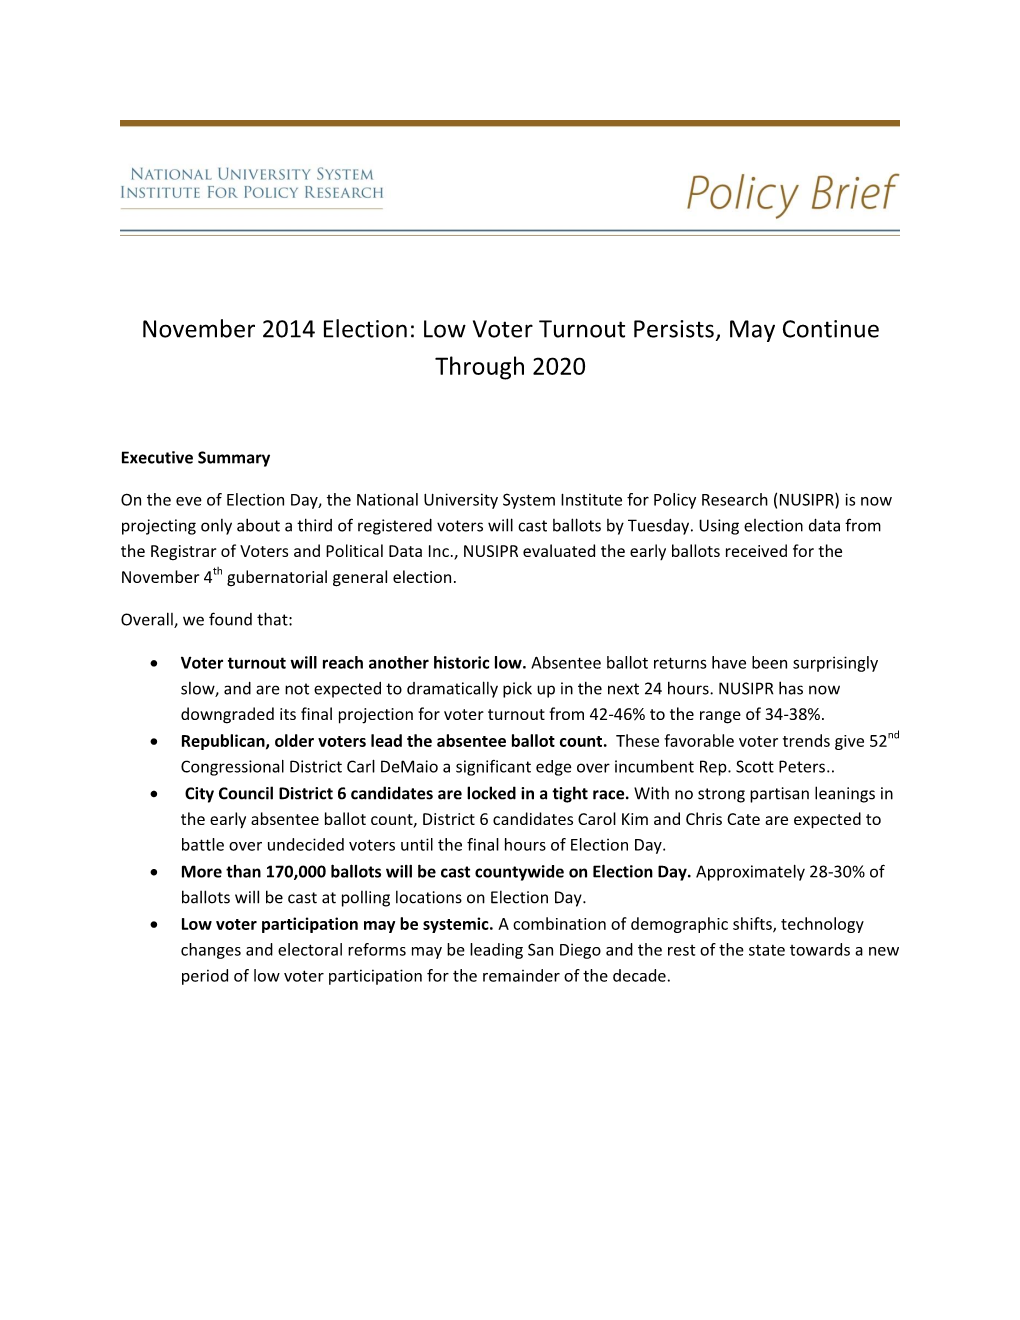 November 2014 Election: Low Voter Turnout Persists, May Continue Through 2020